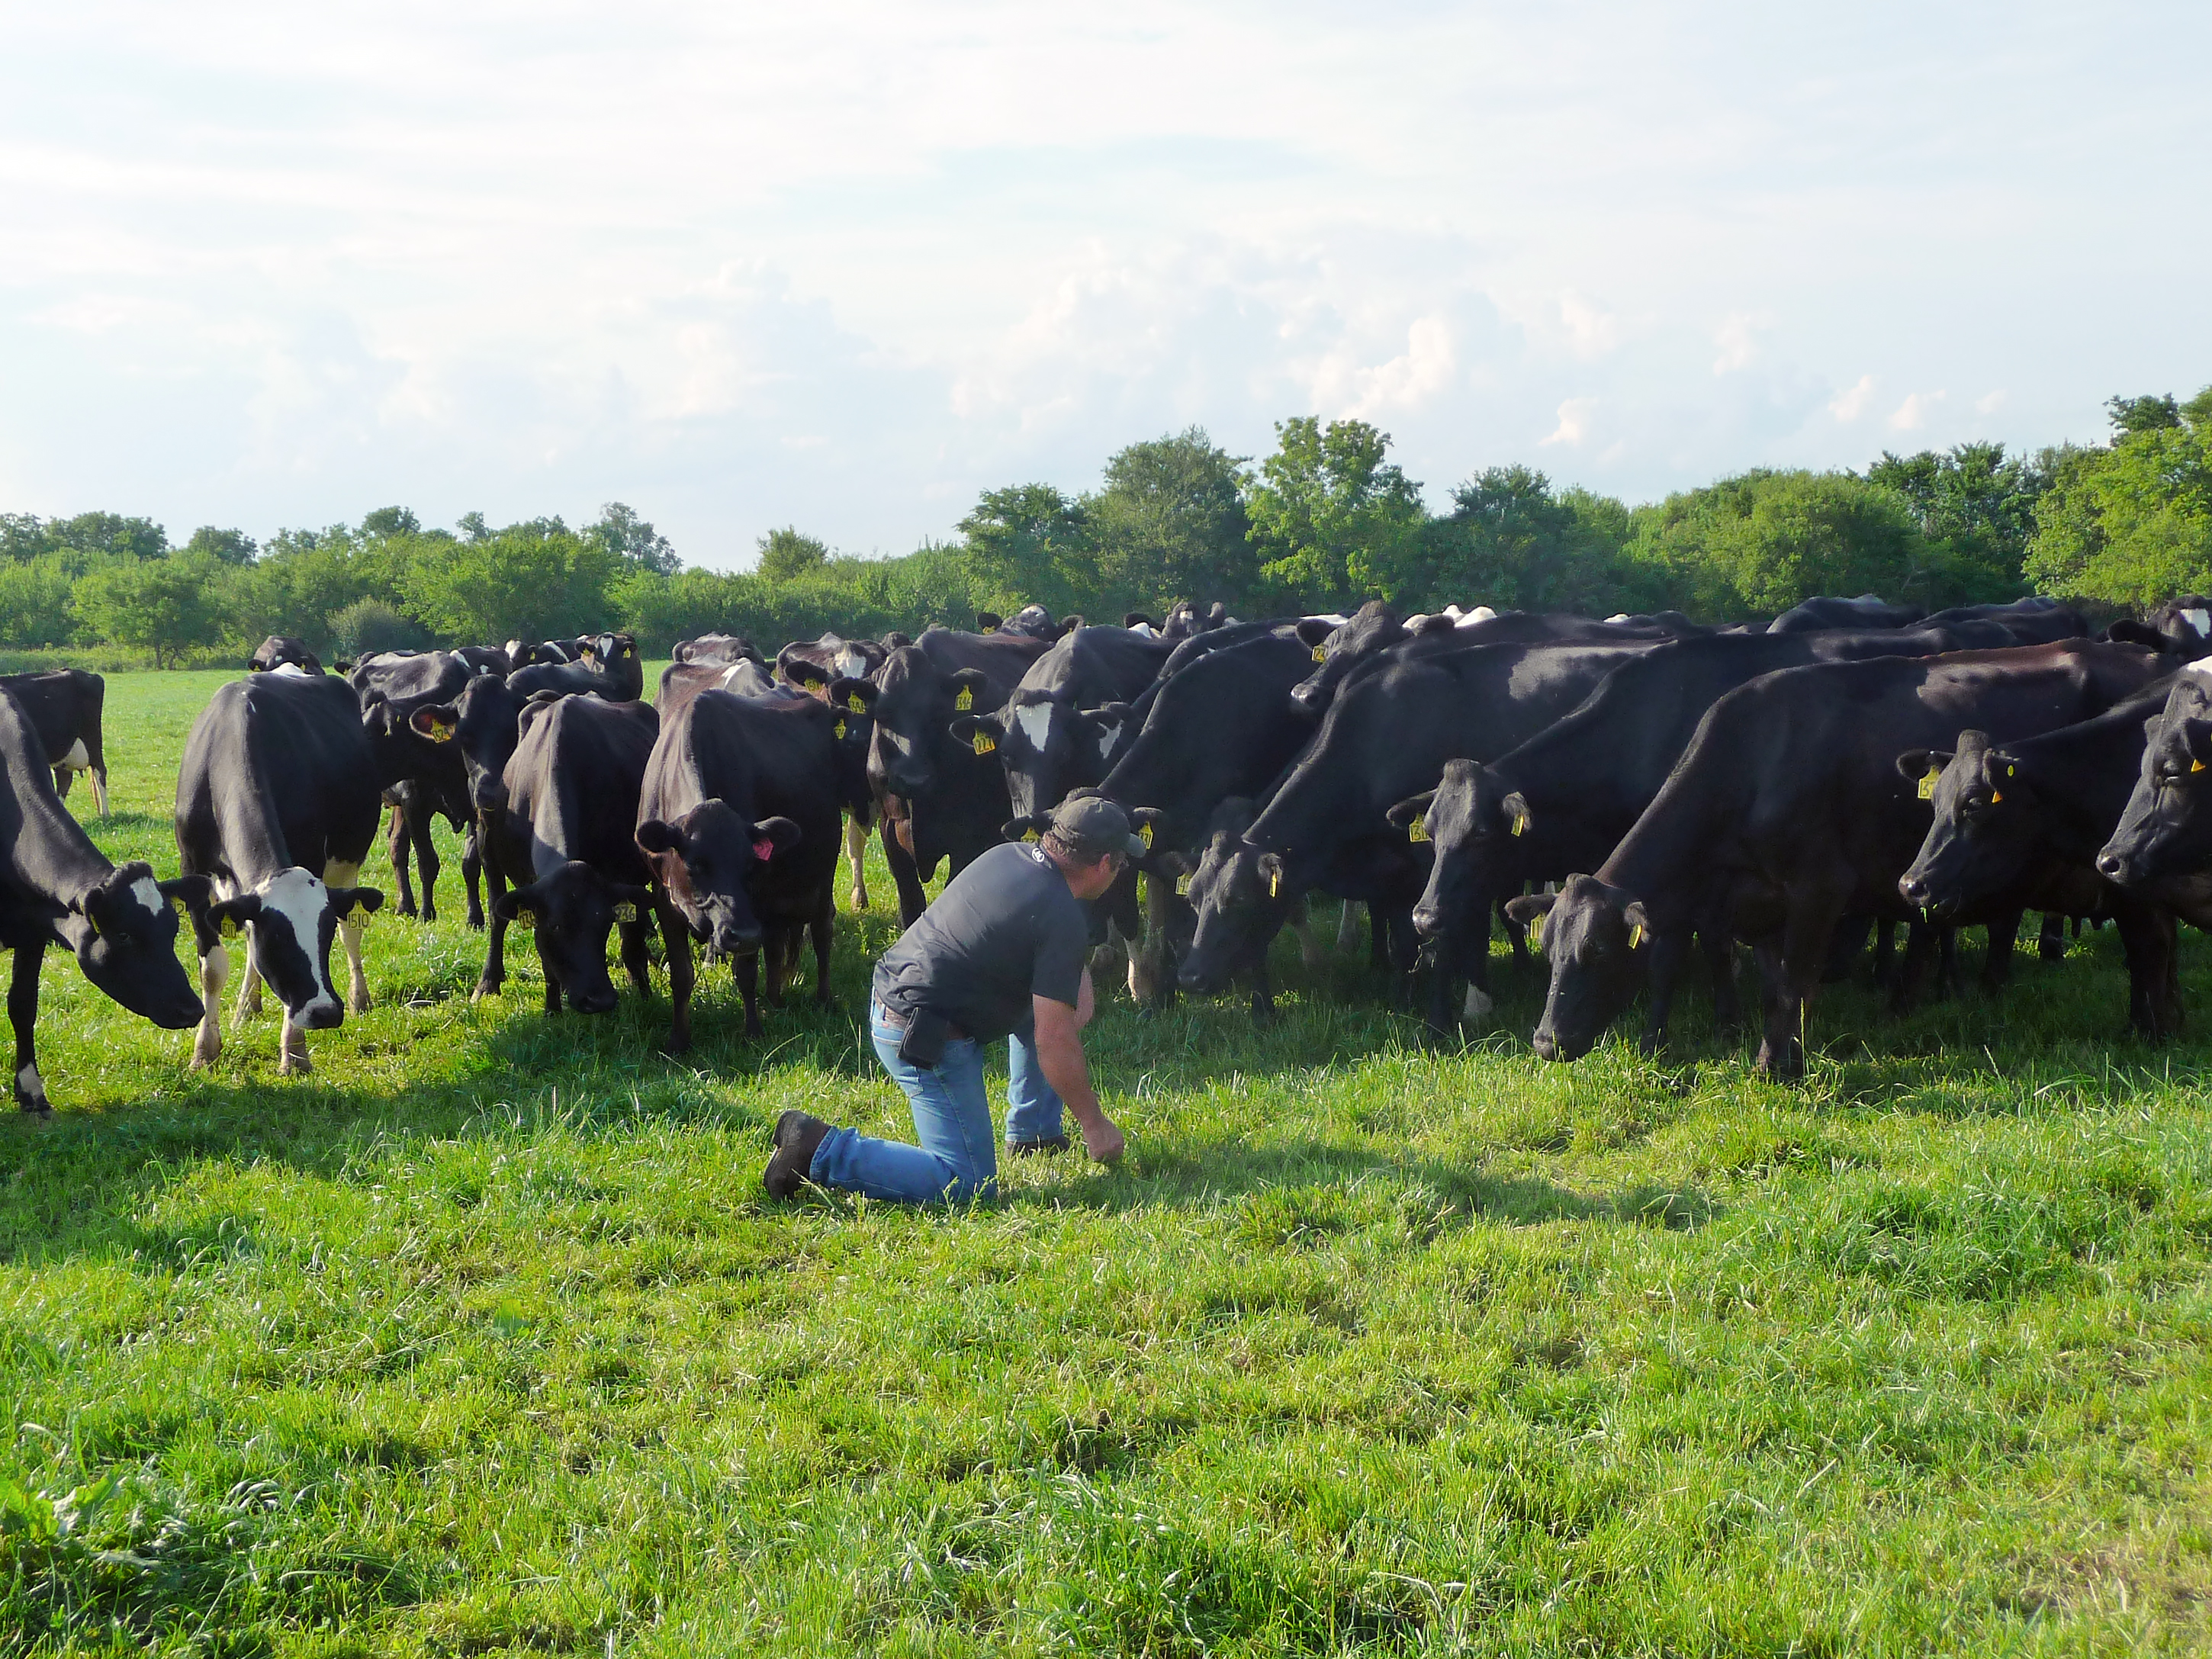 Open Monett farmer Mike Meier used MU Extension practices to improve his dairy operation. He is in the process of converting his dairy operation to beef by using the same proven research-based methods.